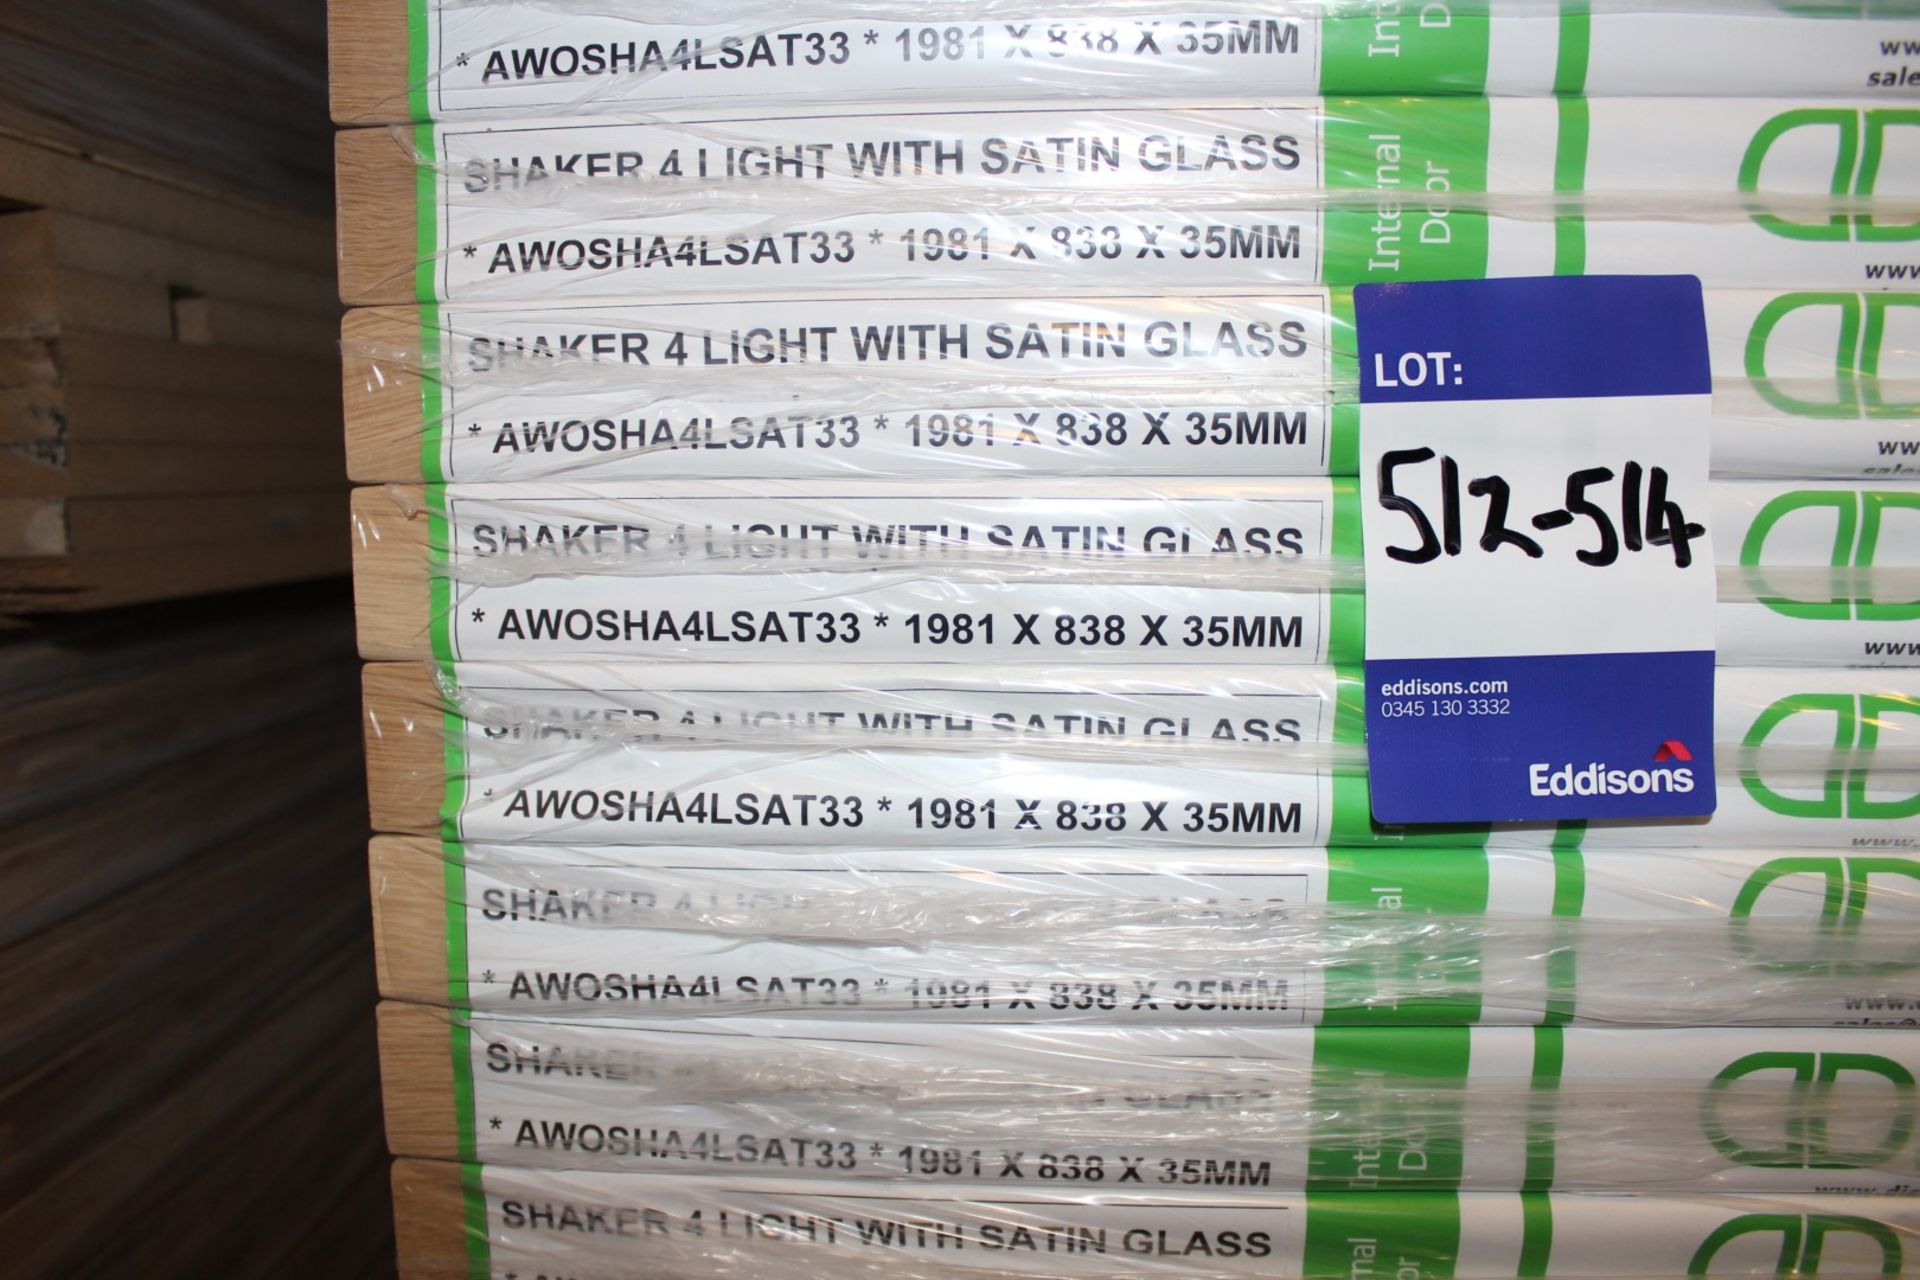 7 x Shaker 4 Lite with Satin Glass AWOSHA4ISAT33 1981x838x35mm Internal Door - Lots to be handed out - Image 3 of 3